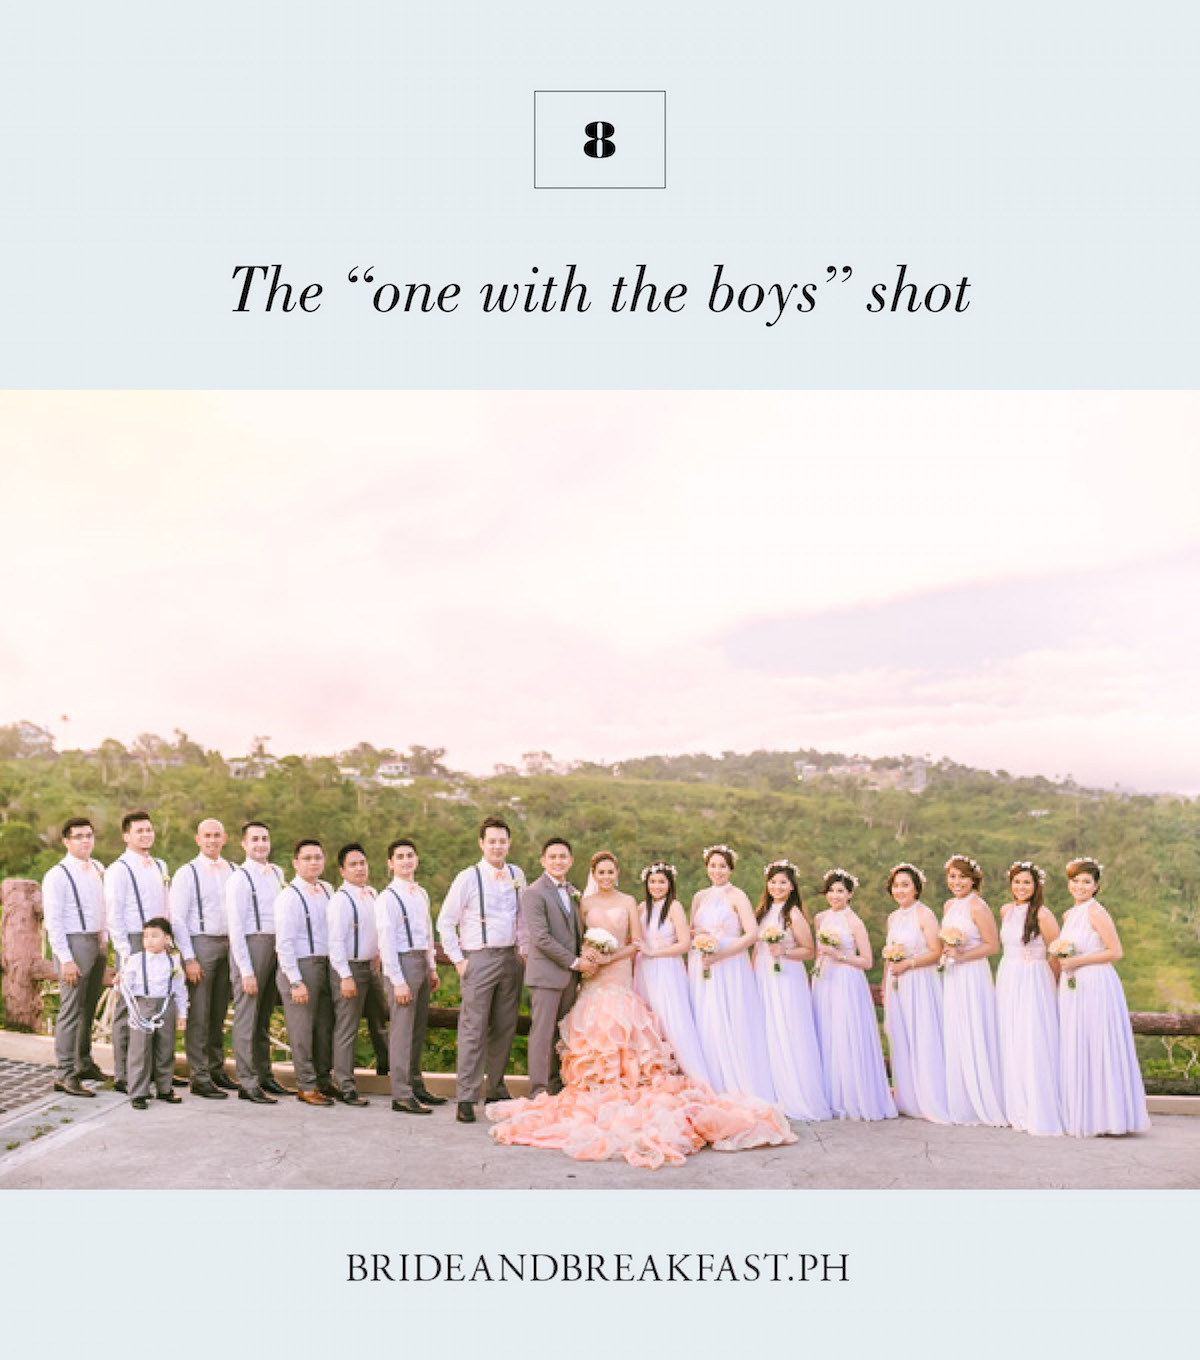 8. The "one with the boys" shot